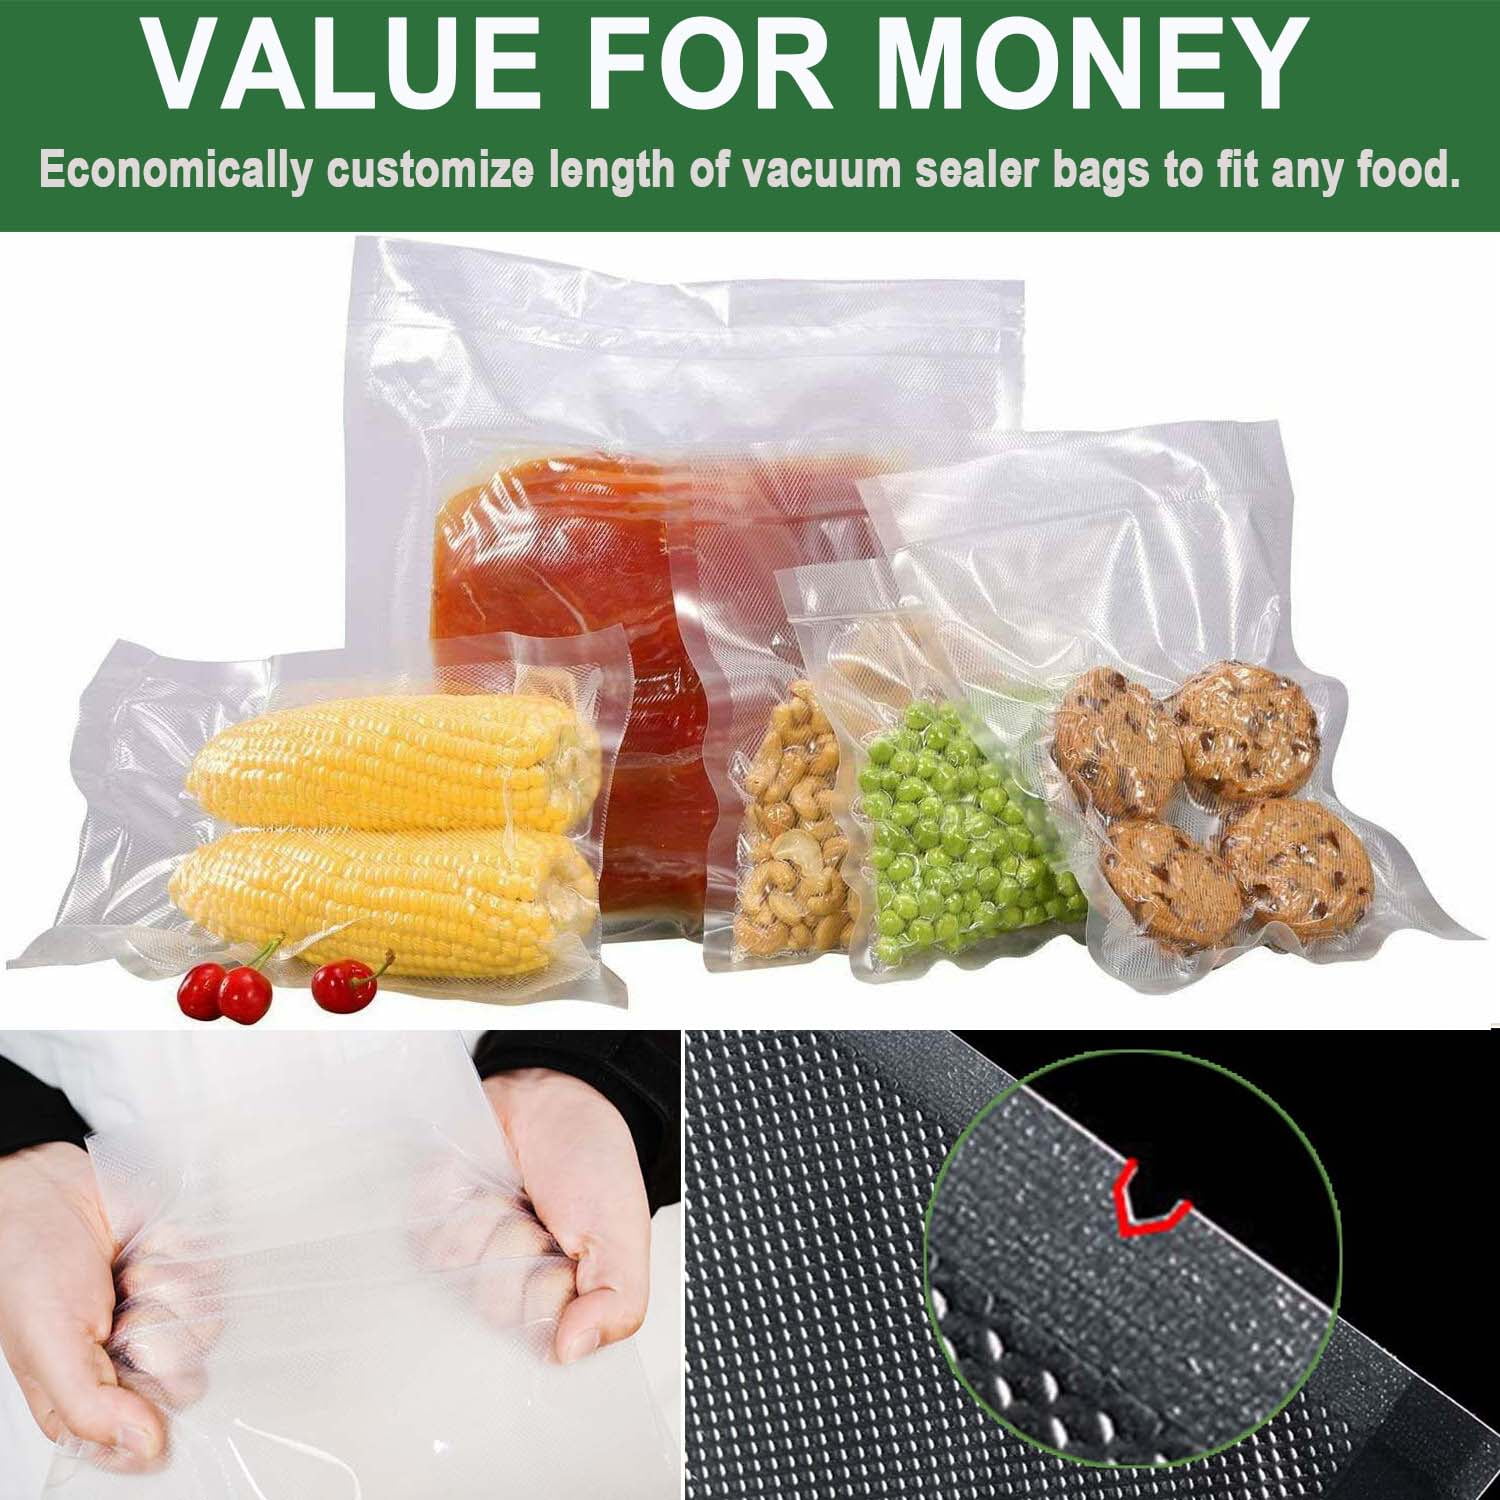 Happy Seal Vacuum Sealer Bags 11x50 Rolls 2 Pack for Food Saver, Seal a  Meal, BPA Free, Commercial Grade, Great for Vac Storage, Meal Prep or Sous  Vide - Yahoo Shopping